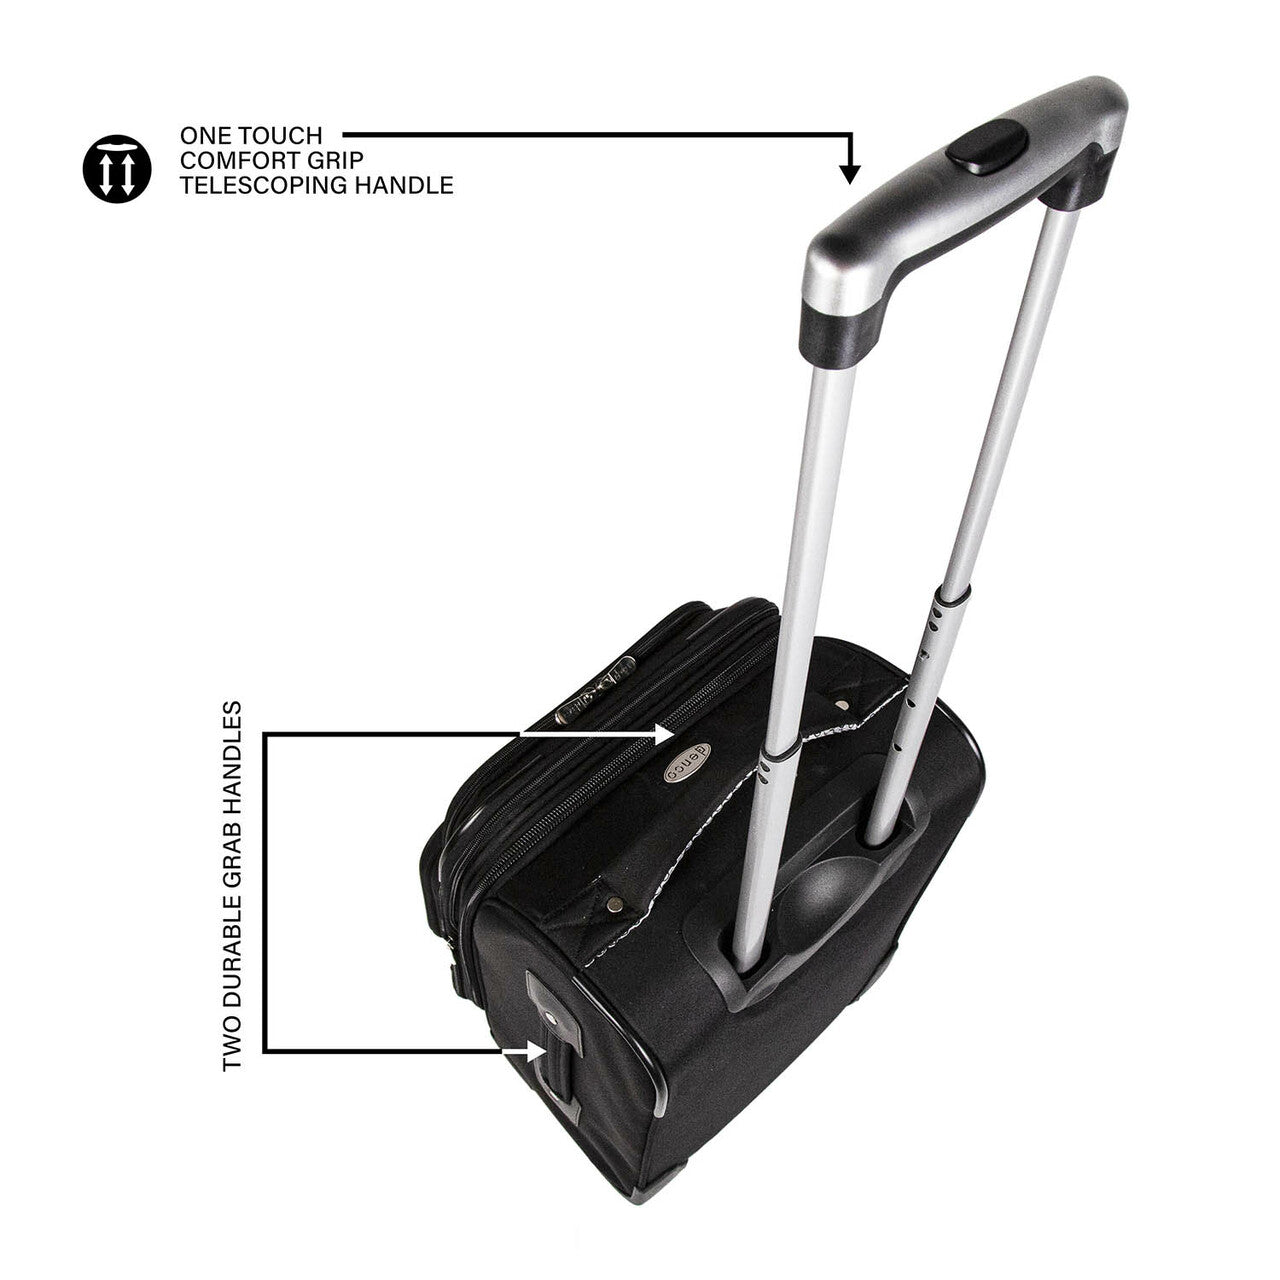 Houston Rockets 21" Carry-on Spinner Luggage